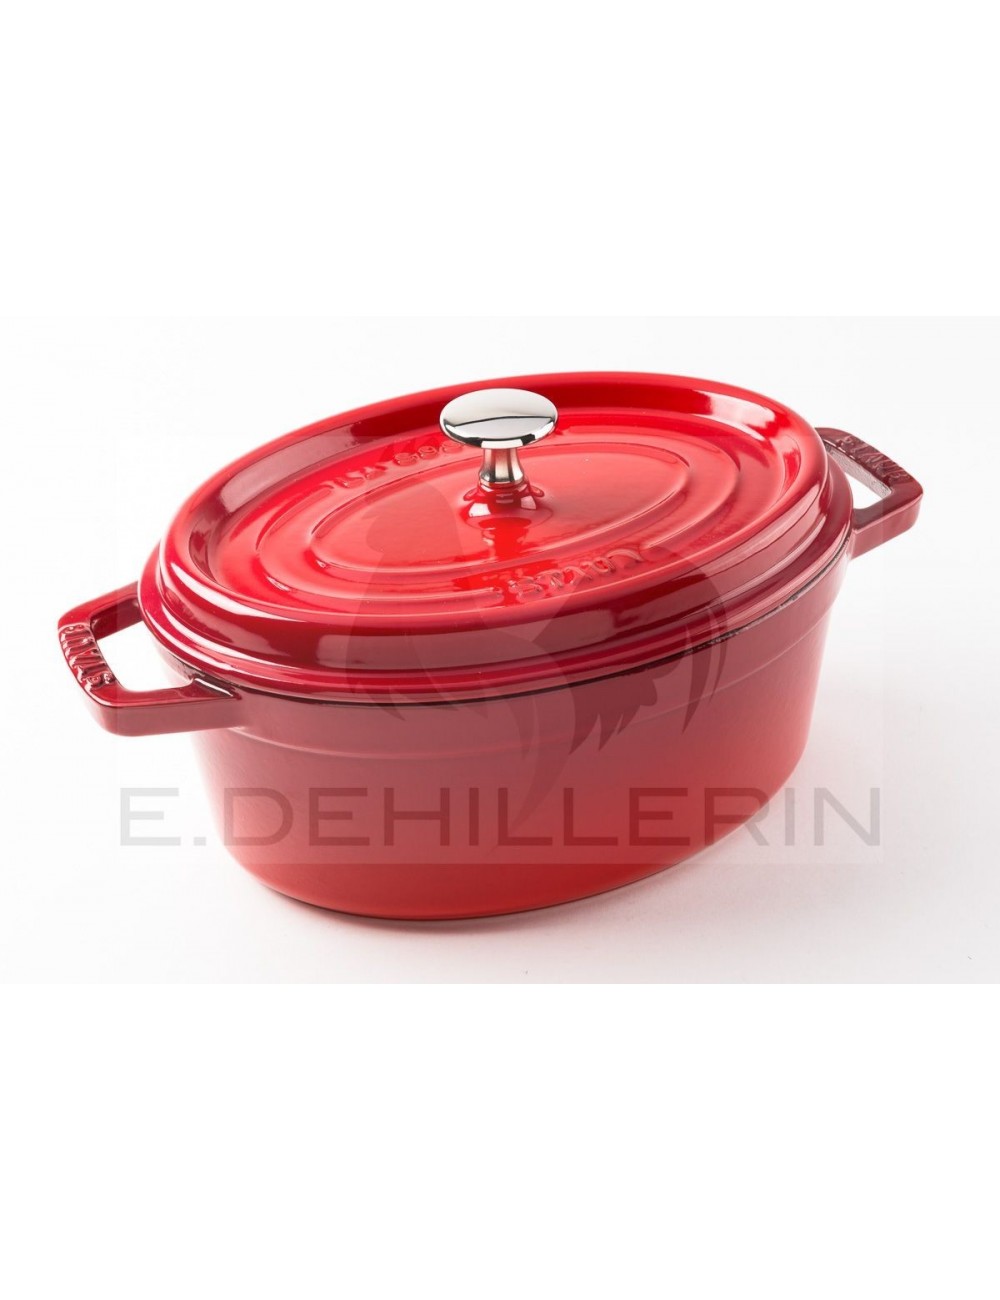 Candy Thermometer In Modern Metal Pot With Red Handles With